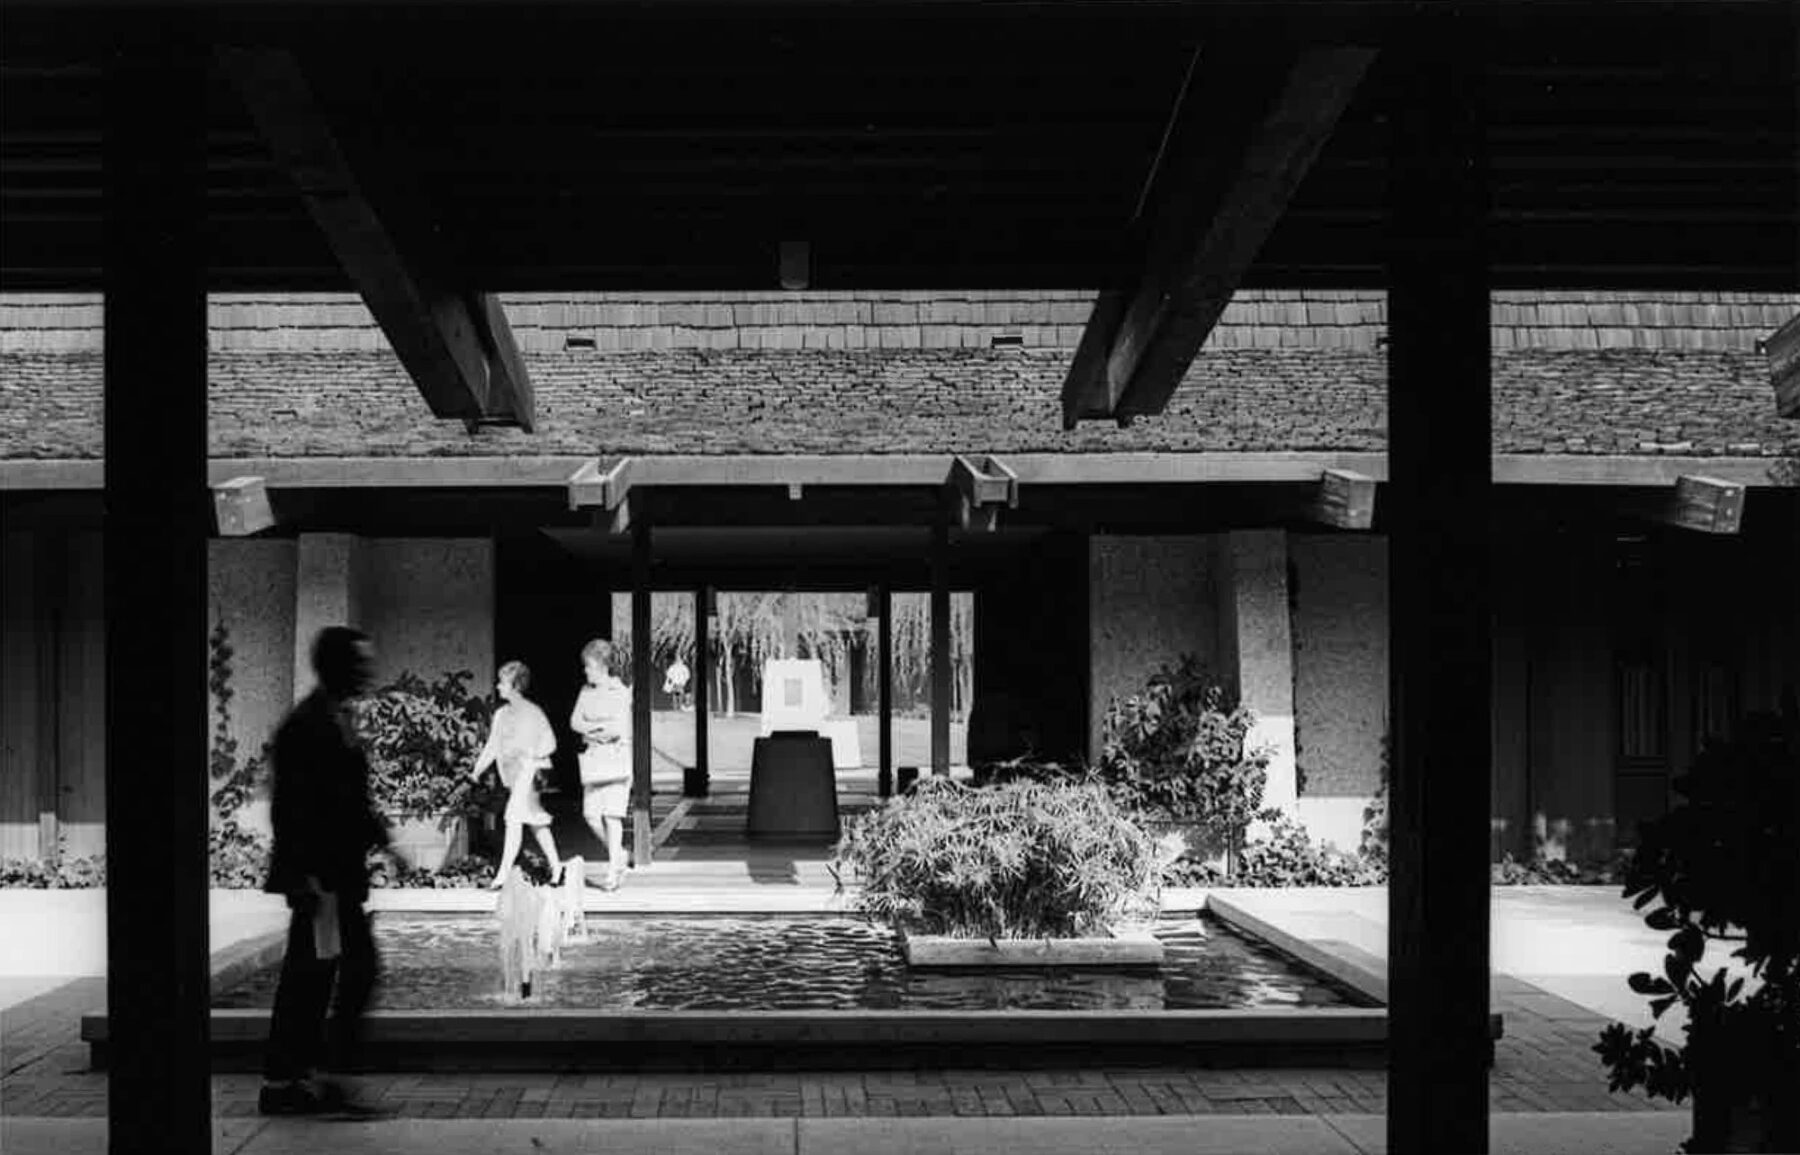 black and white photograph of fountain in courtyard with students walking in foreground and background